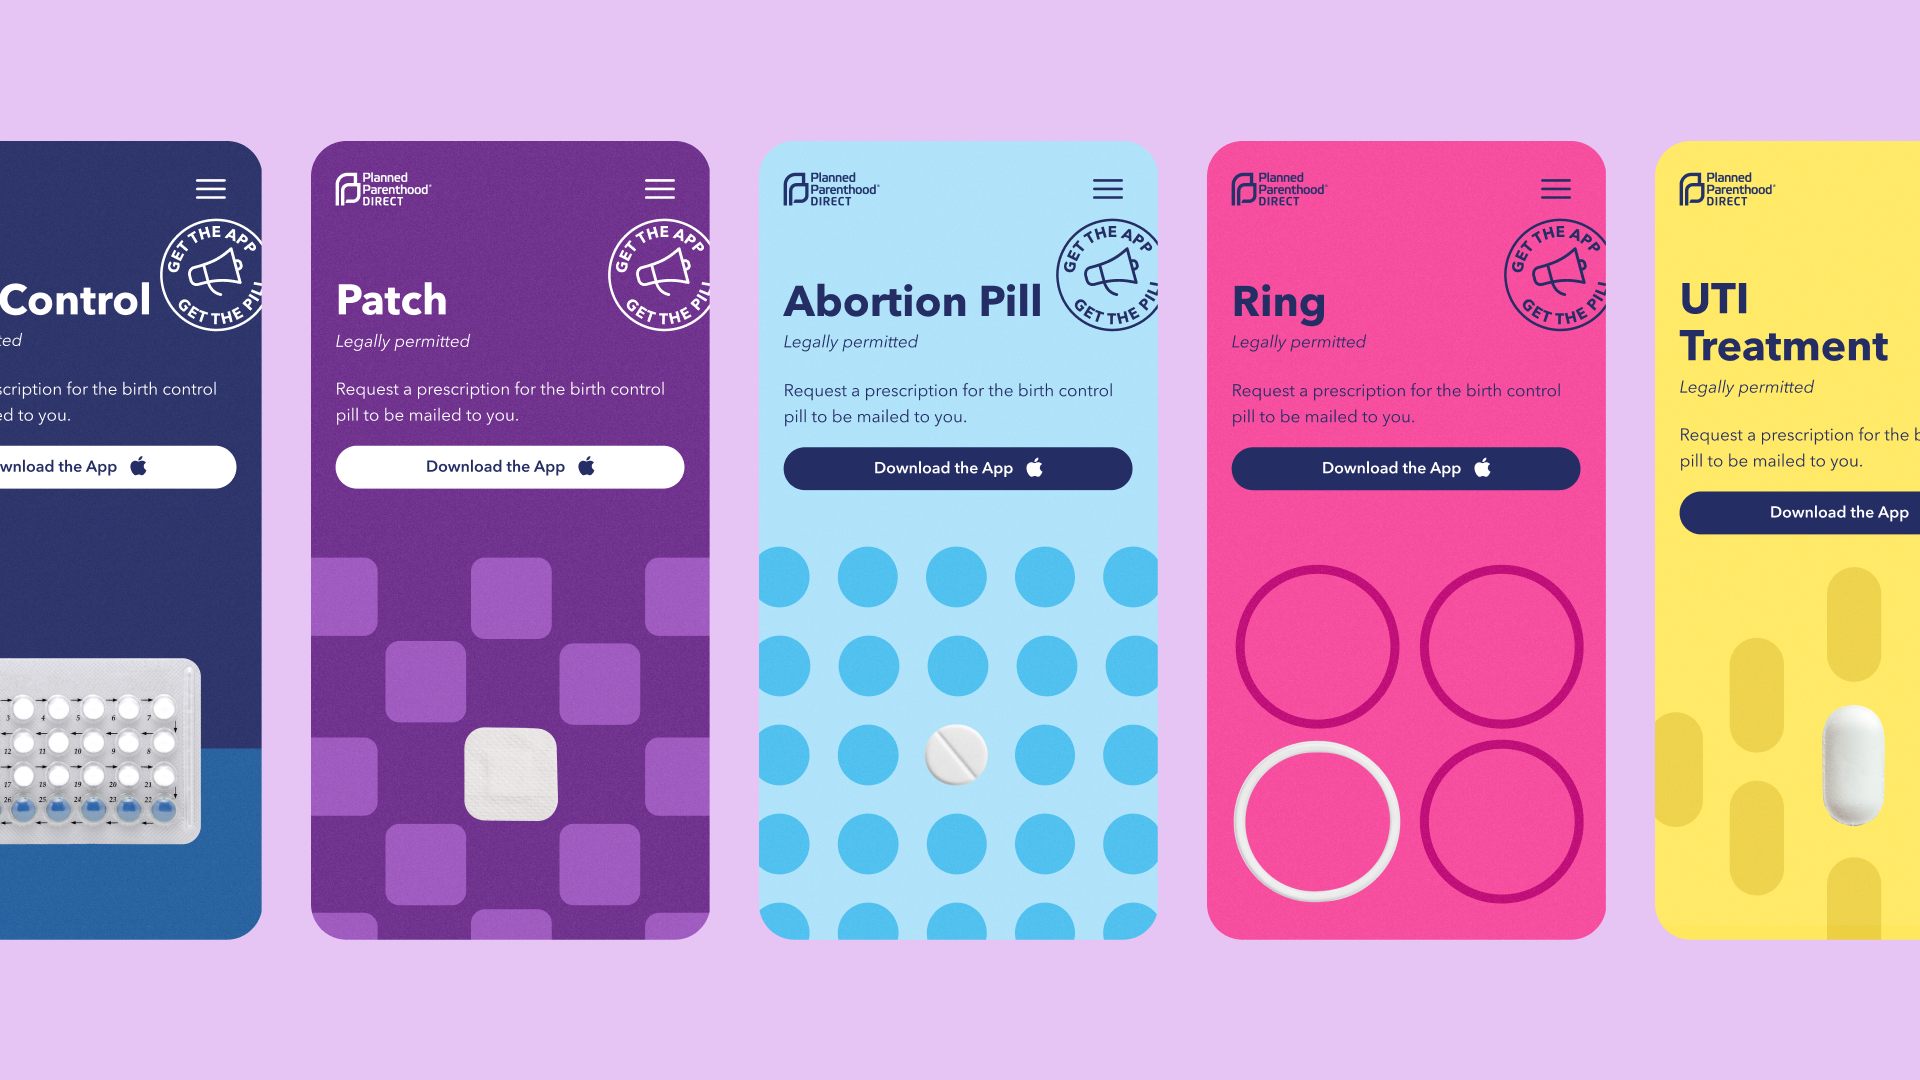 Bold mobile landing pages for different types of contraception